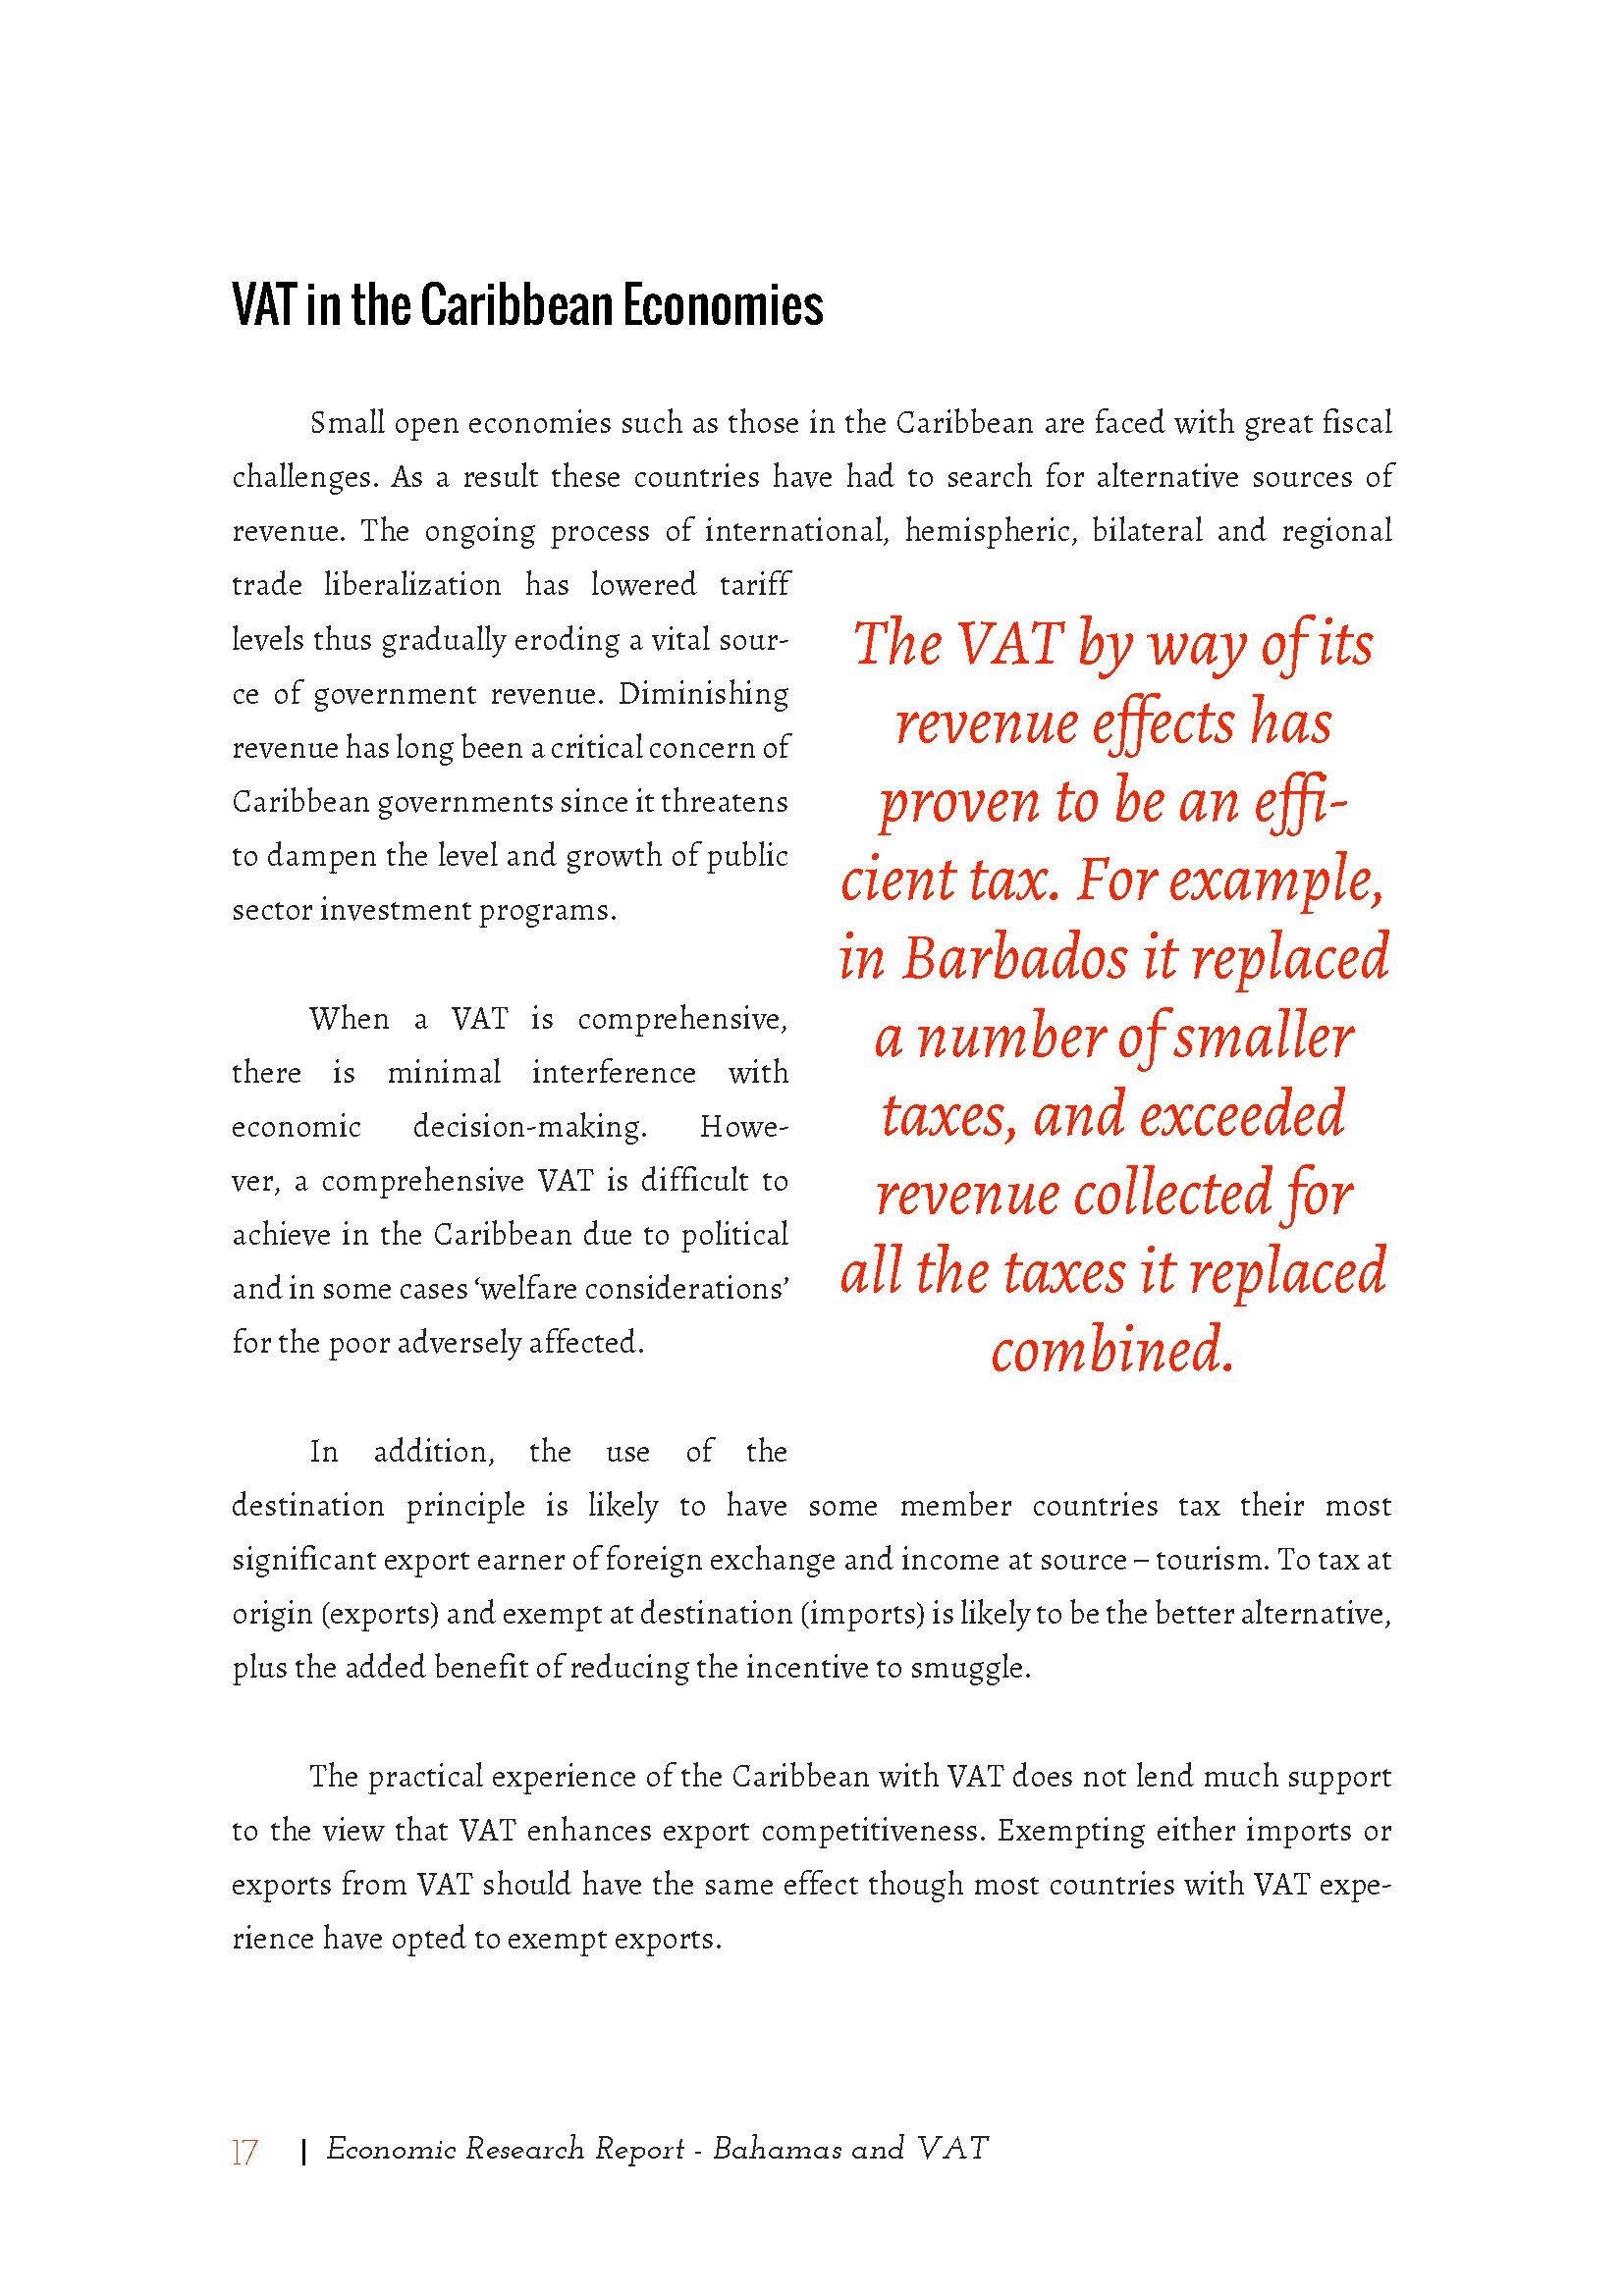 White Paper - VAT in the Bahamas_Page_17.jpg